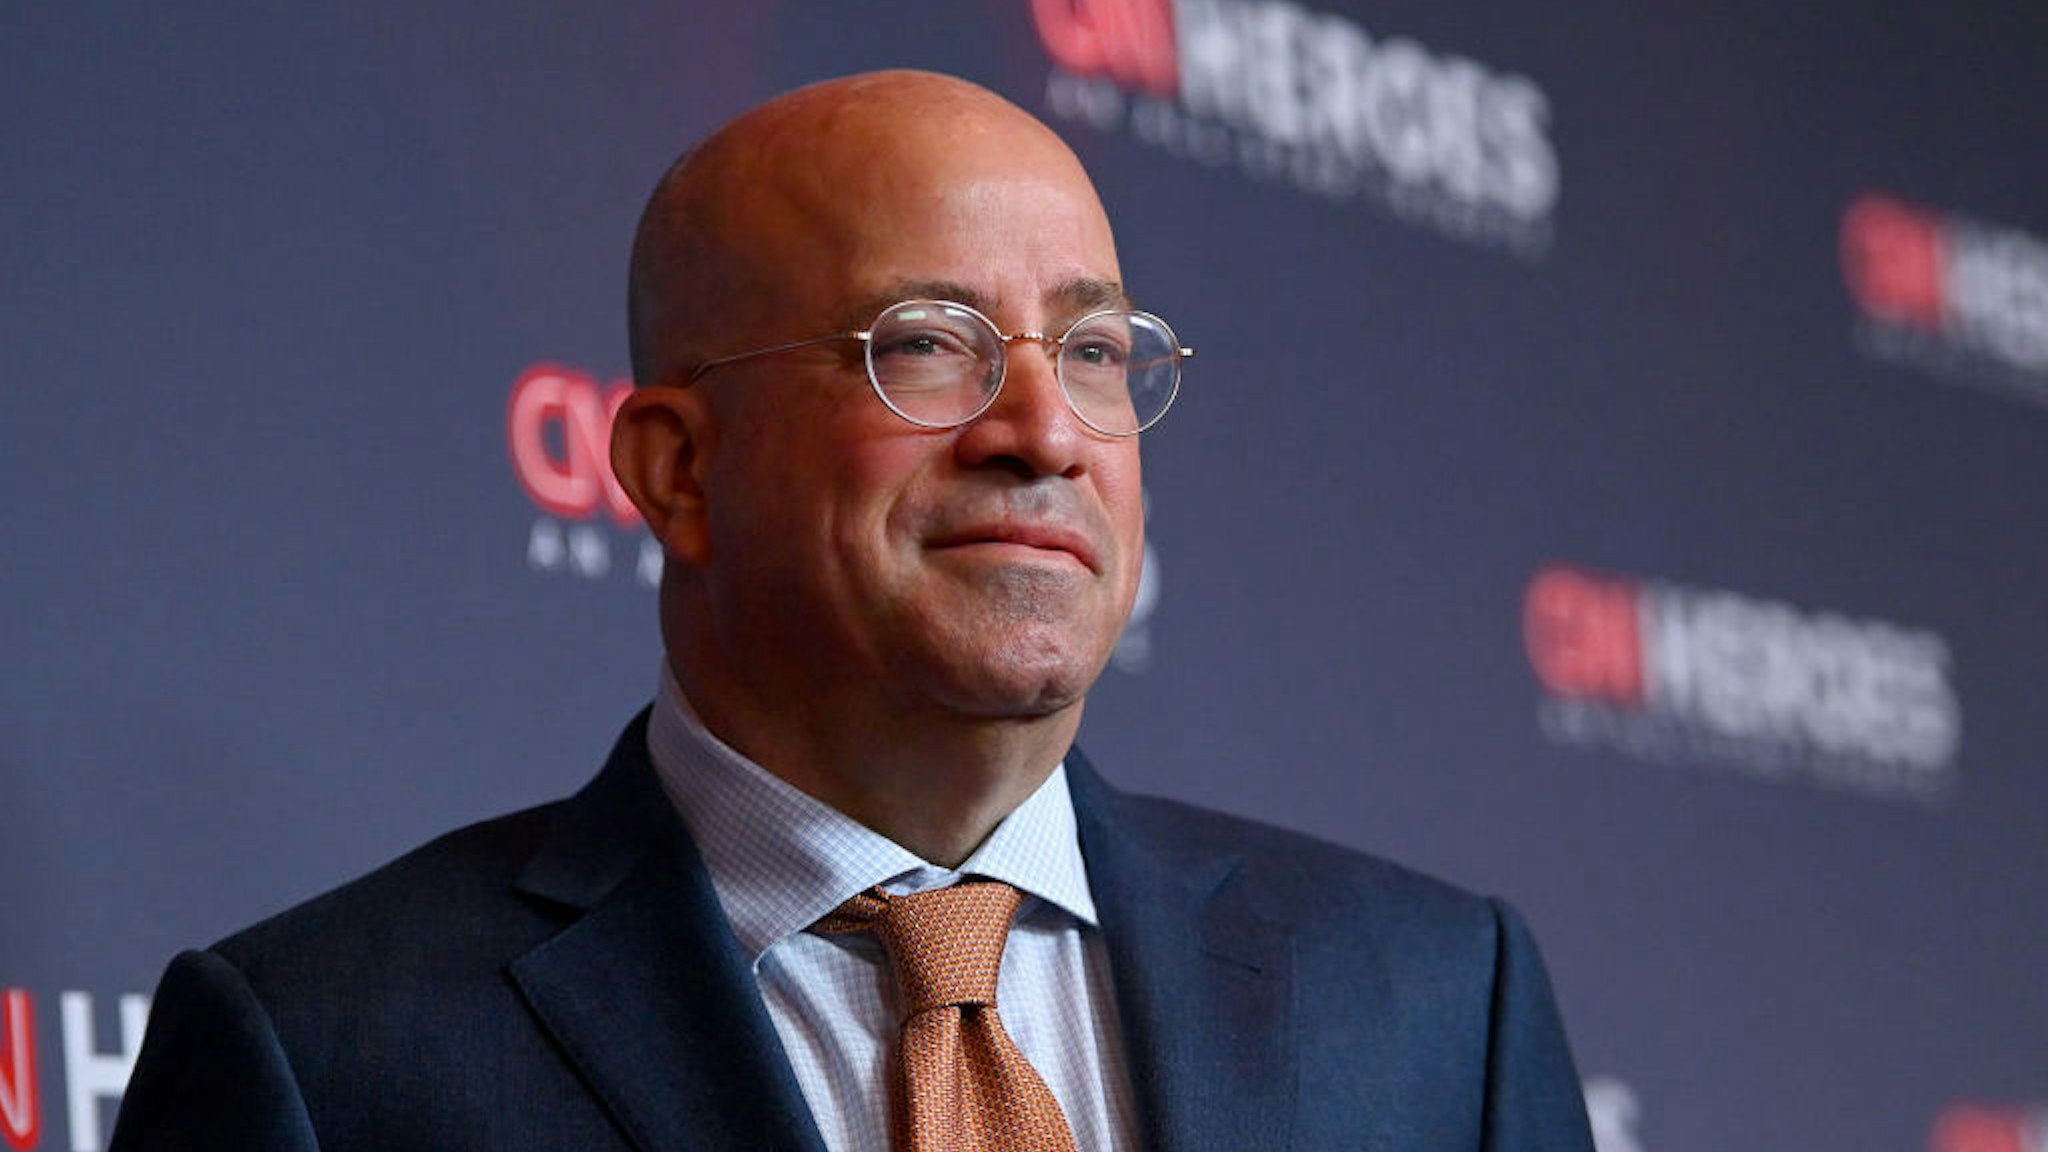 NEW YORK, NEW YORK - DECEMBER 08: Chairman, WarnerMedia Jeff Zucker attends CNN Heroes at American Museum of Natural History on December 08, 2019 in New York City. (Photo by Mike Coppola/Getty Images for WarnerMedia)